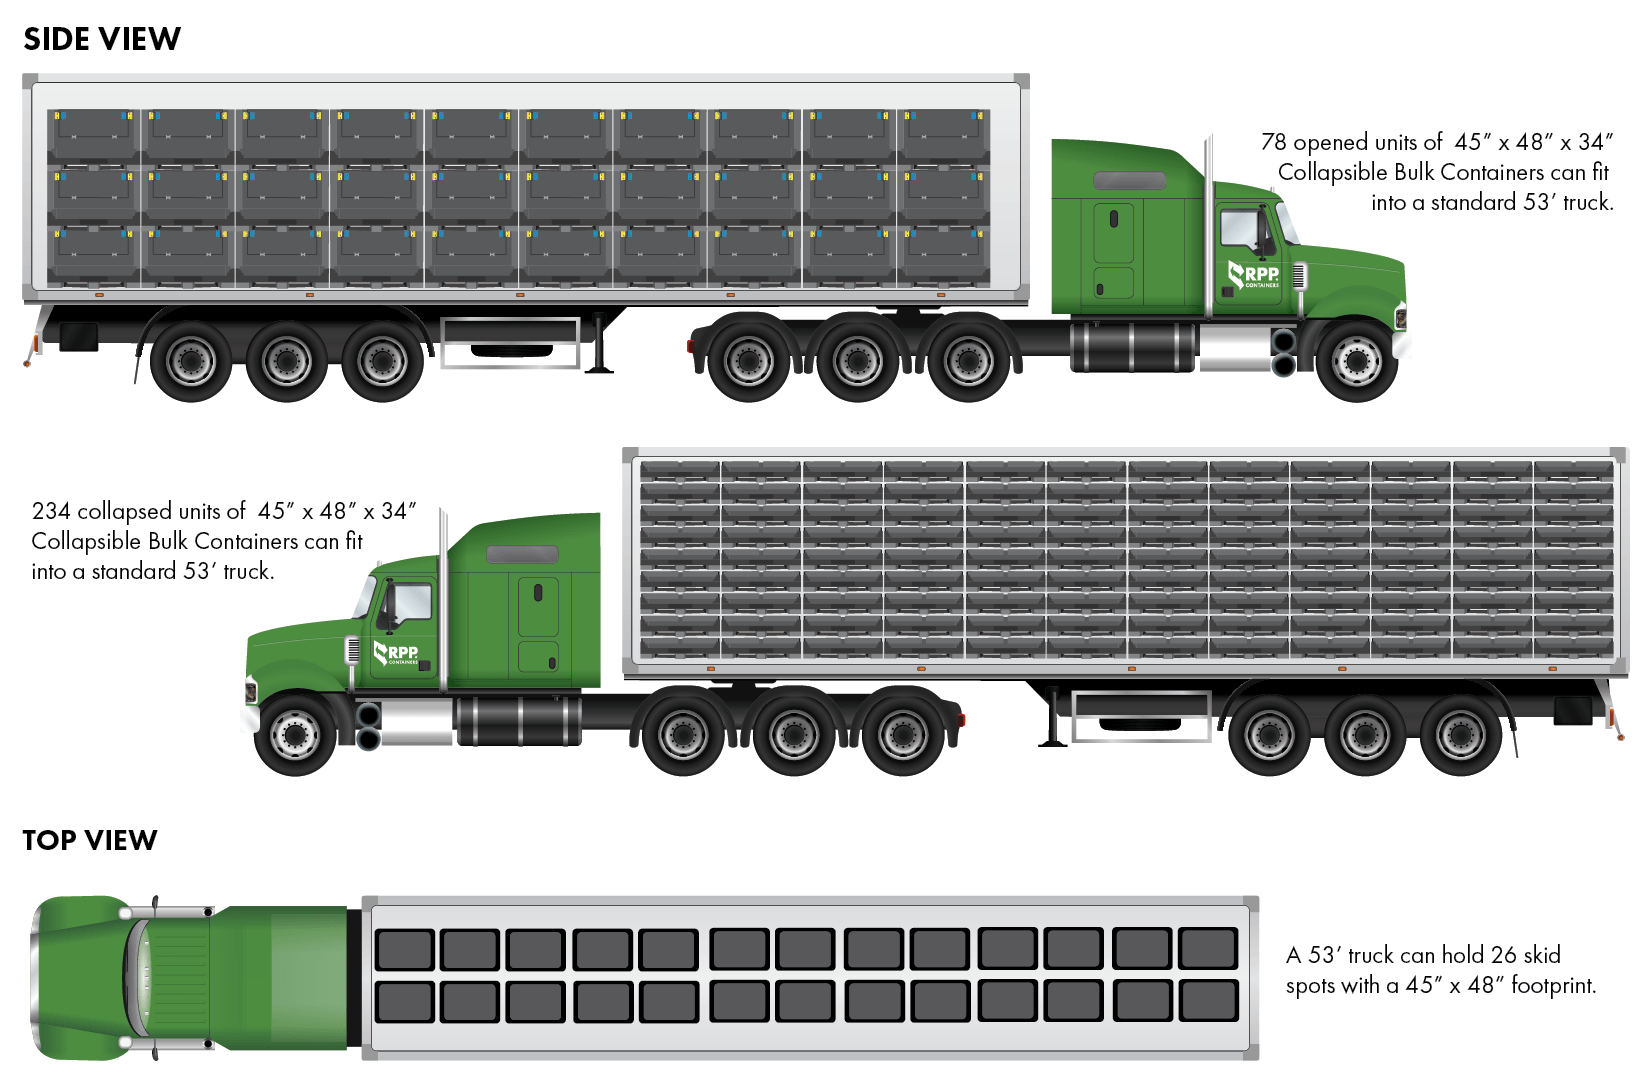 78 units of 45x48x34 collapsible bulk containers can fit in a 53' truck